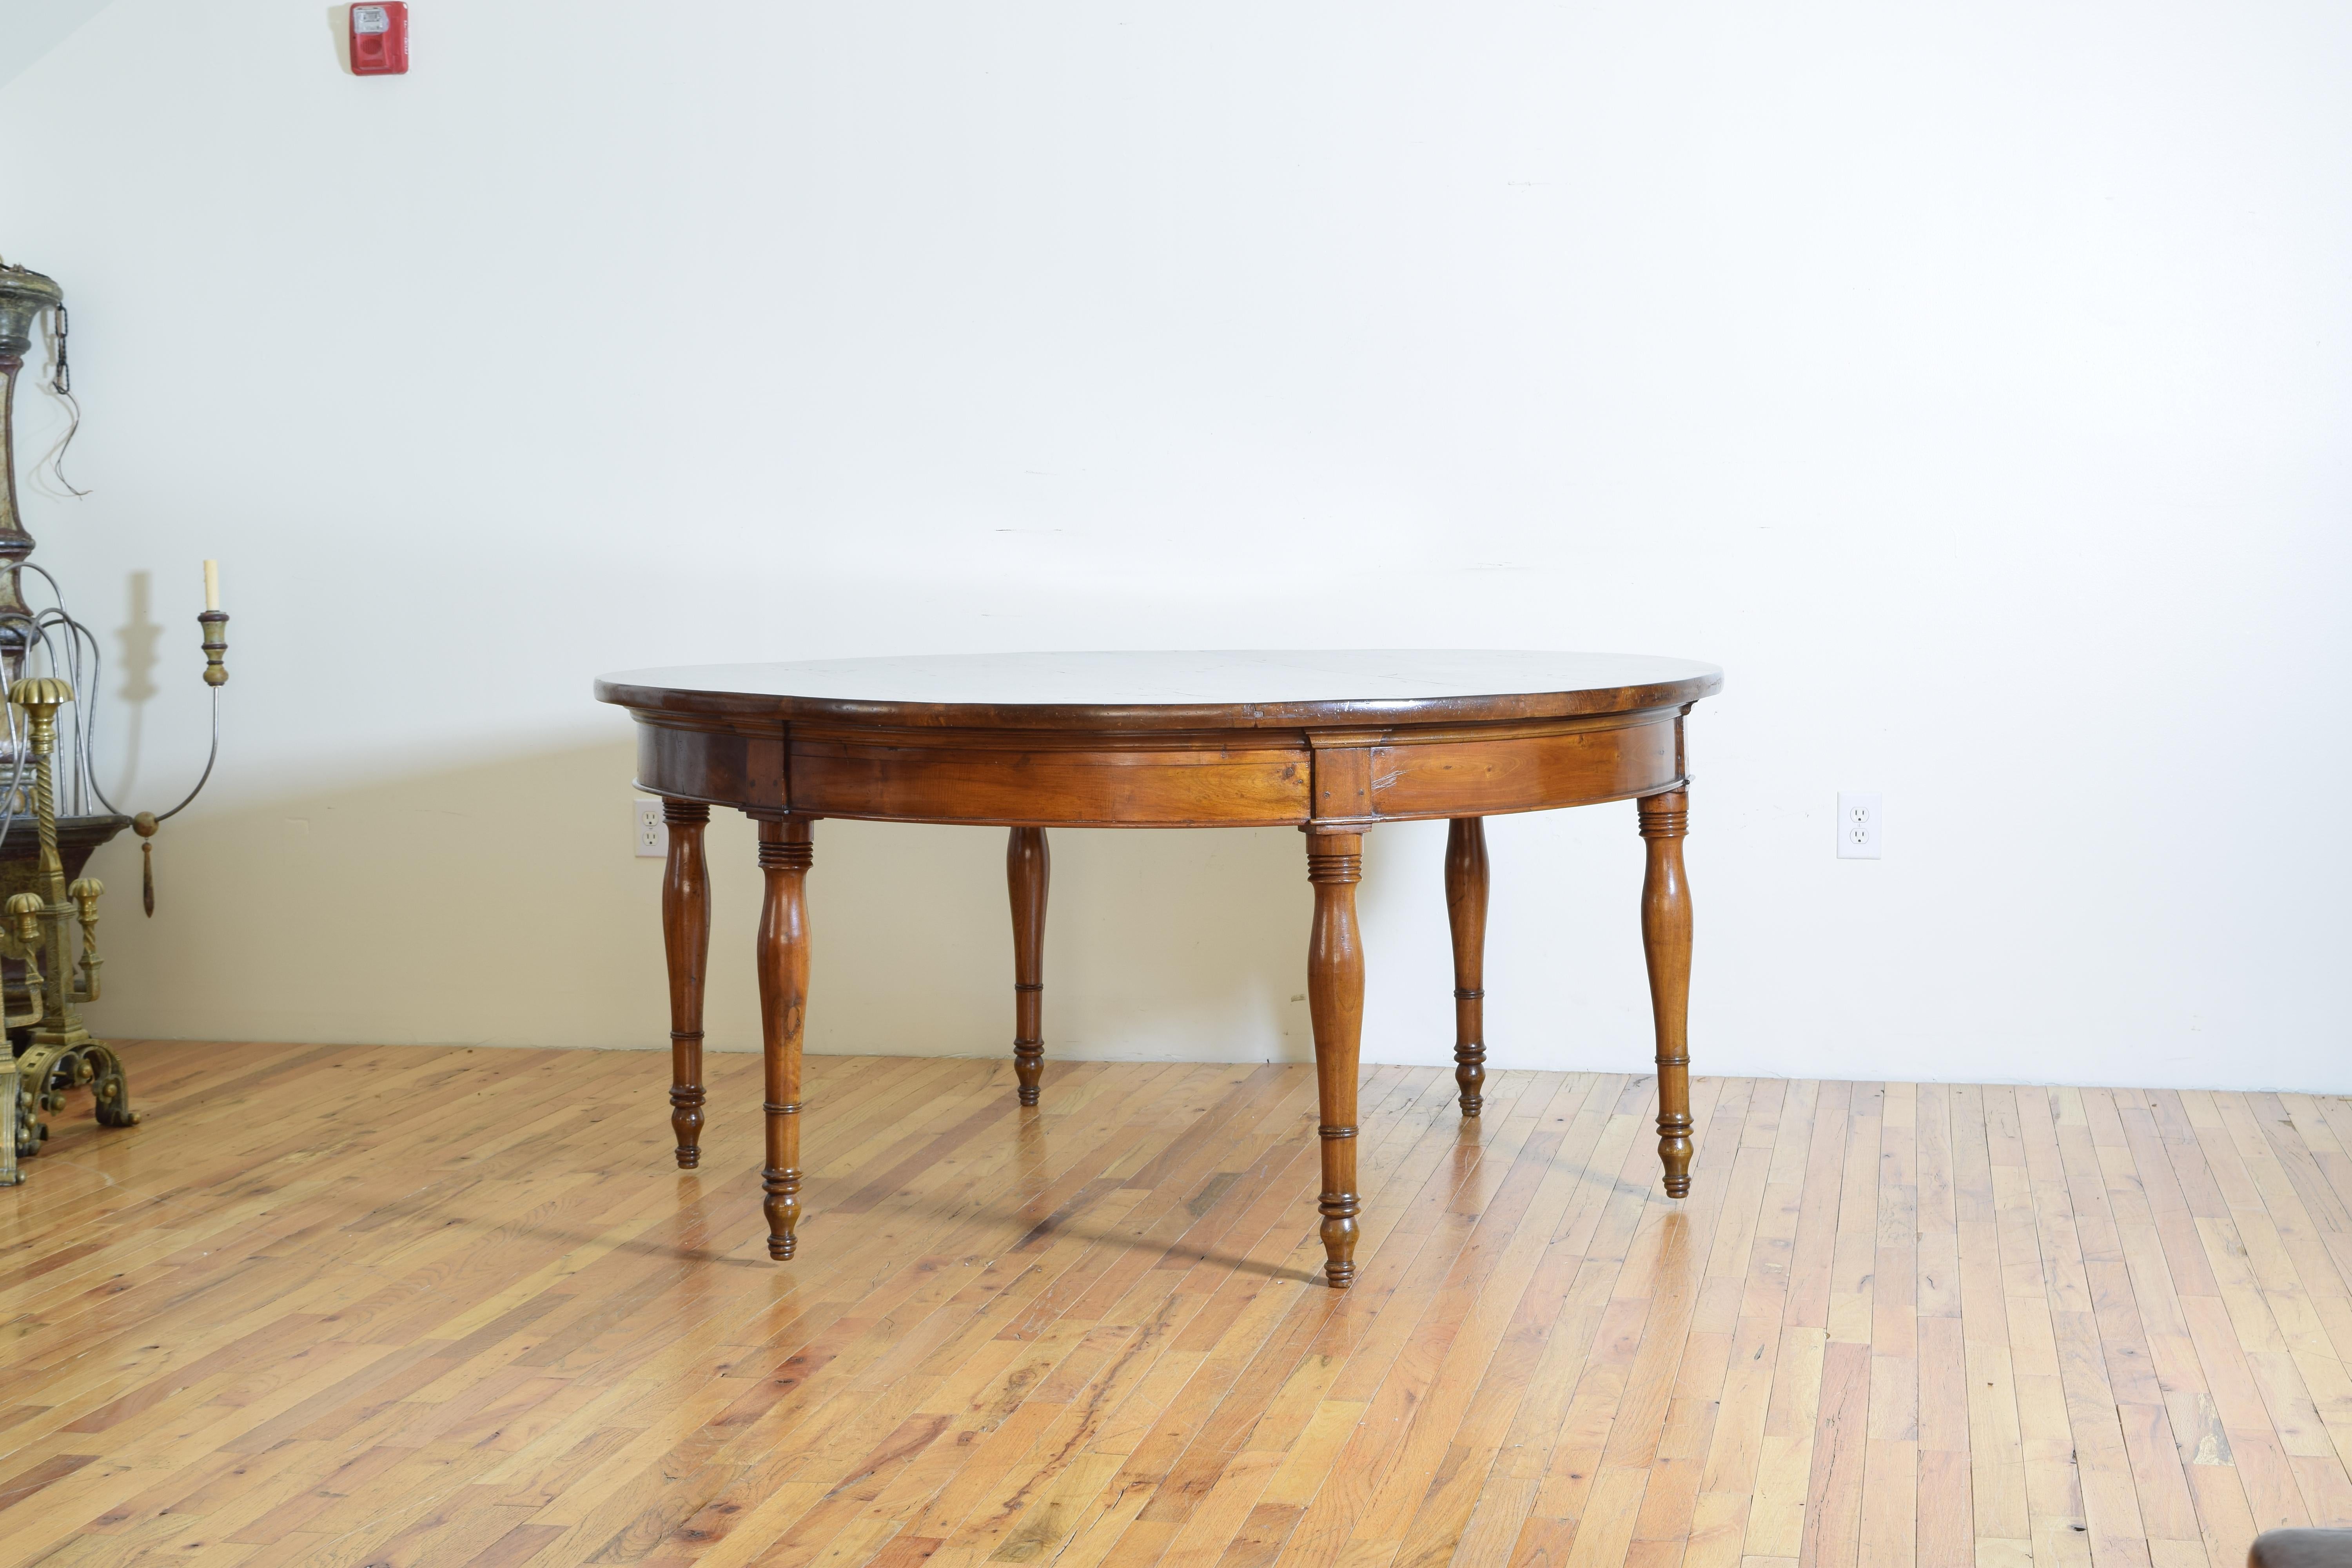 Constructed entirely of solid walnut, the circular top composed of 5 joined boards with a rounded edge, the apron with upper and molded edges and notched capitals at the joints above the legs, the legs with horizontal turnings and slightly tapering,